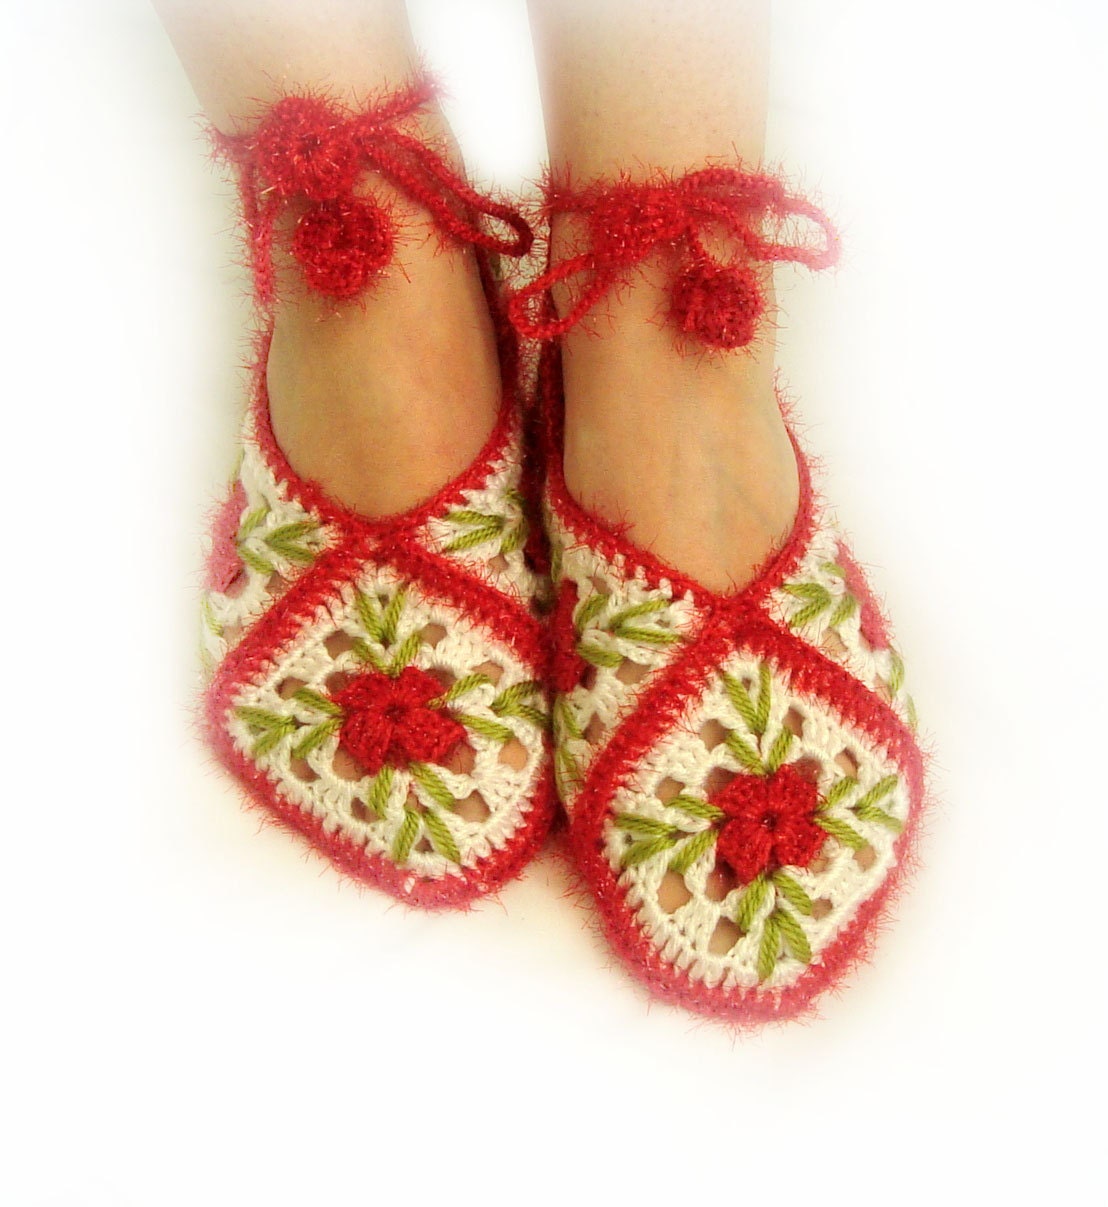 white, lust red, spring bud green home slippers, socks, white home shoes, holiday, style, mothers day - LovelyKnitShop